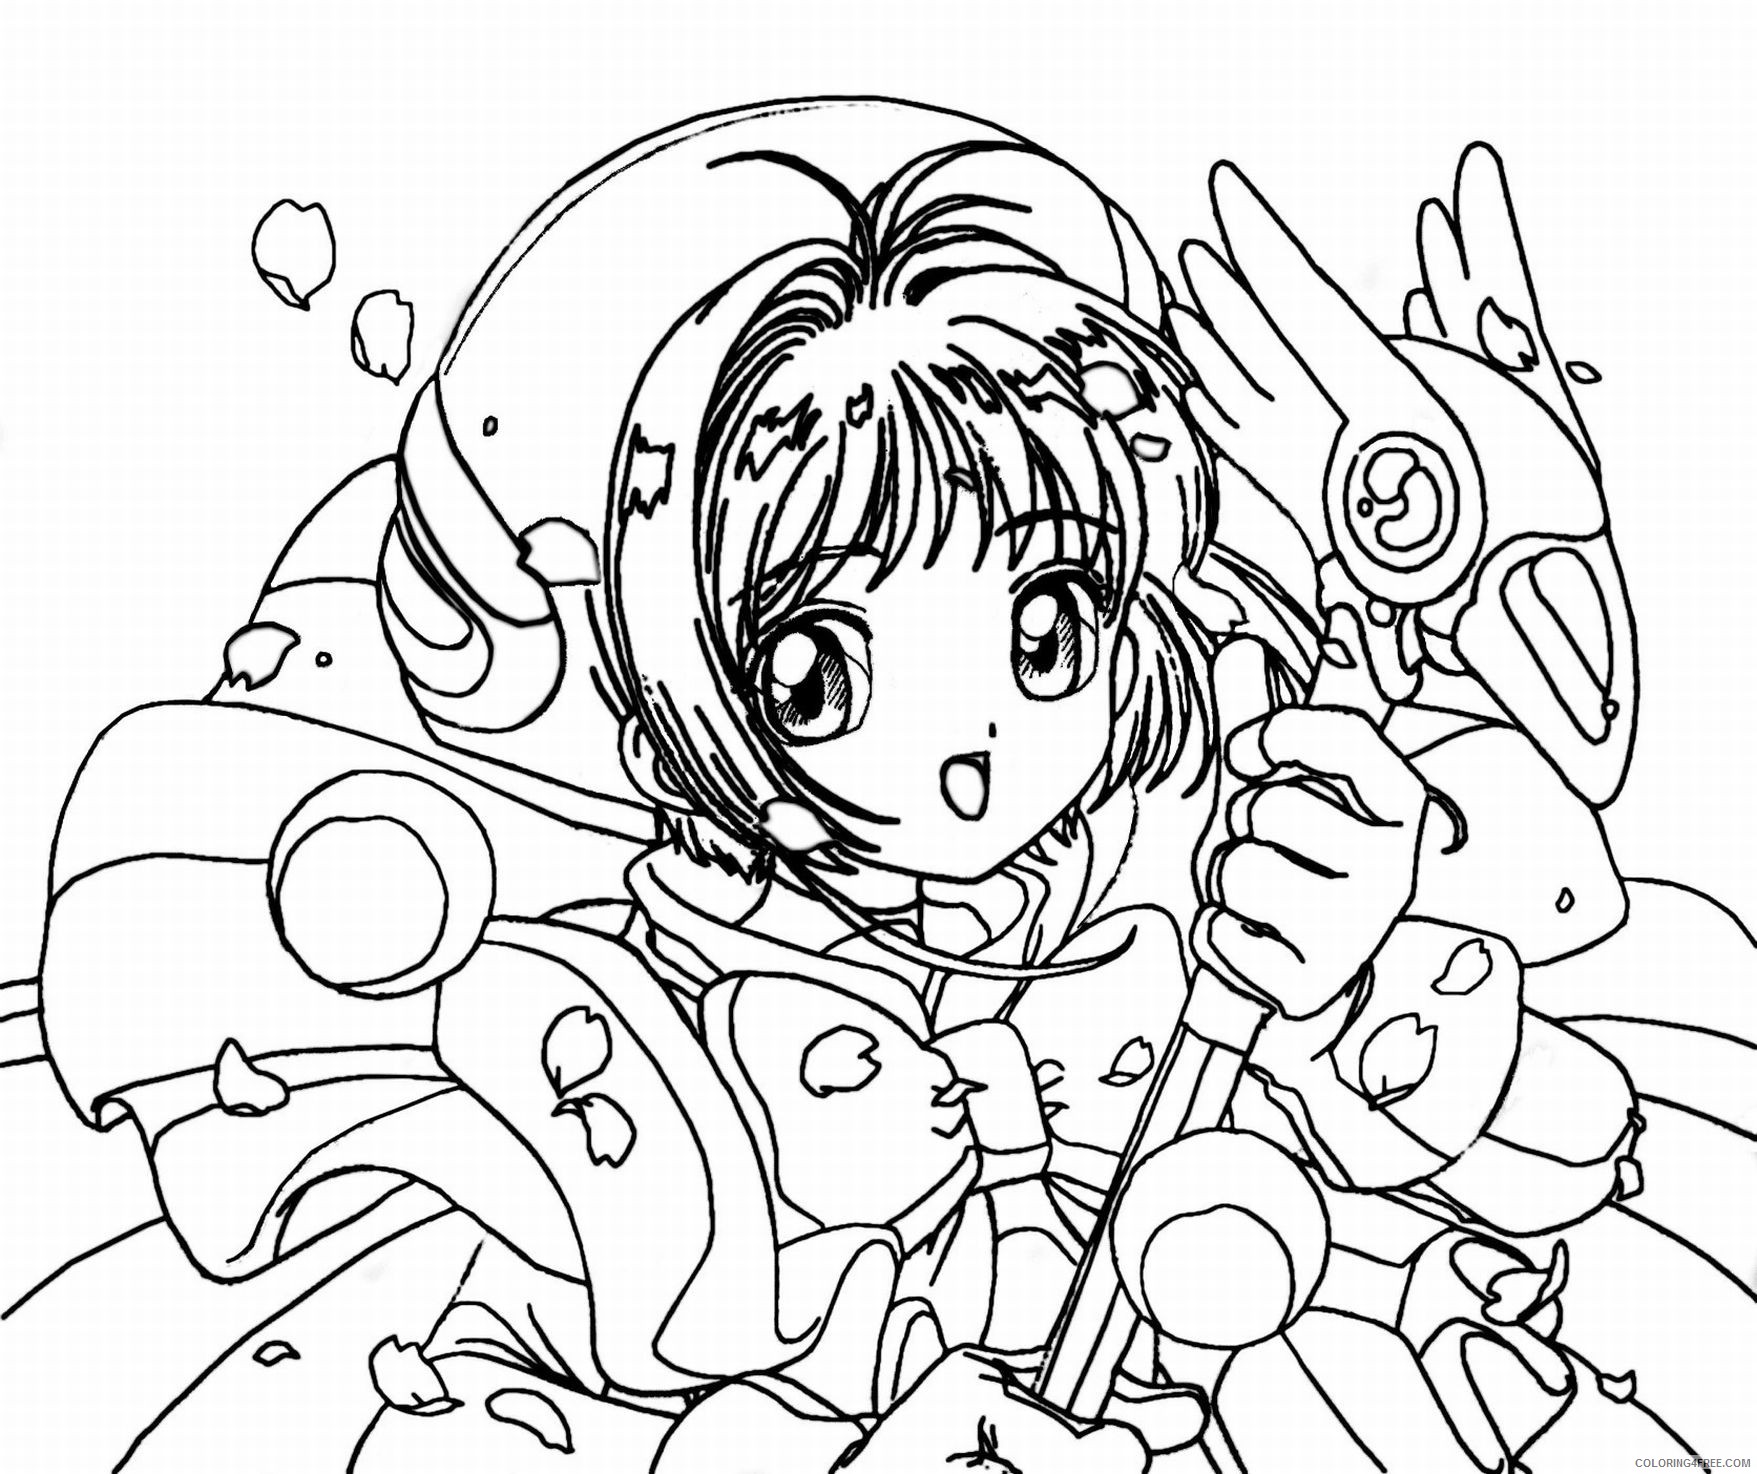 anime girl coloring pages with magic wand Coloring4free